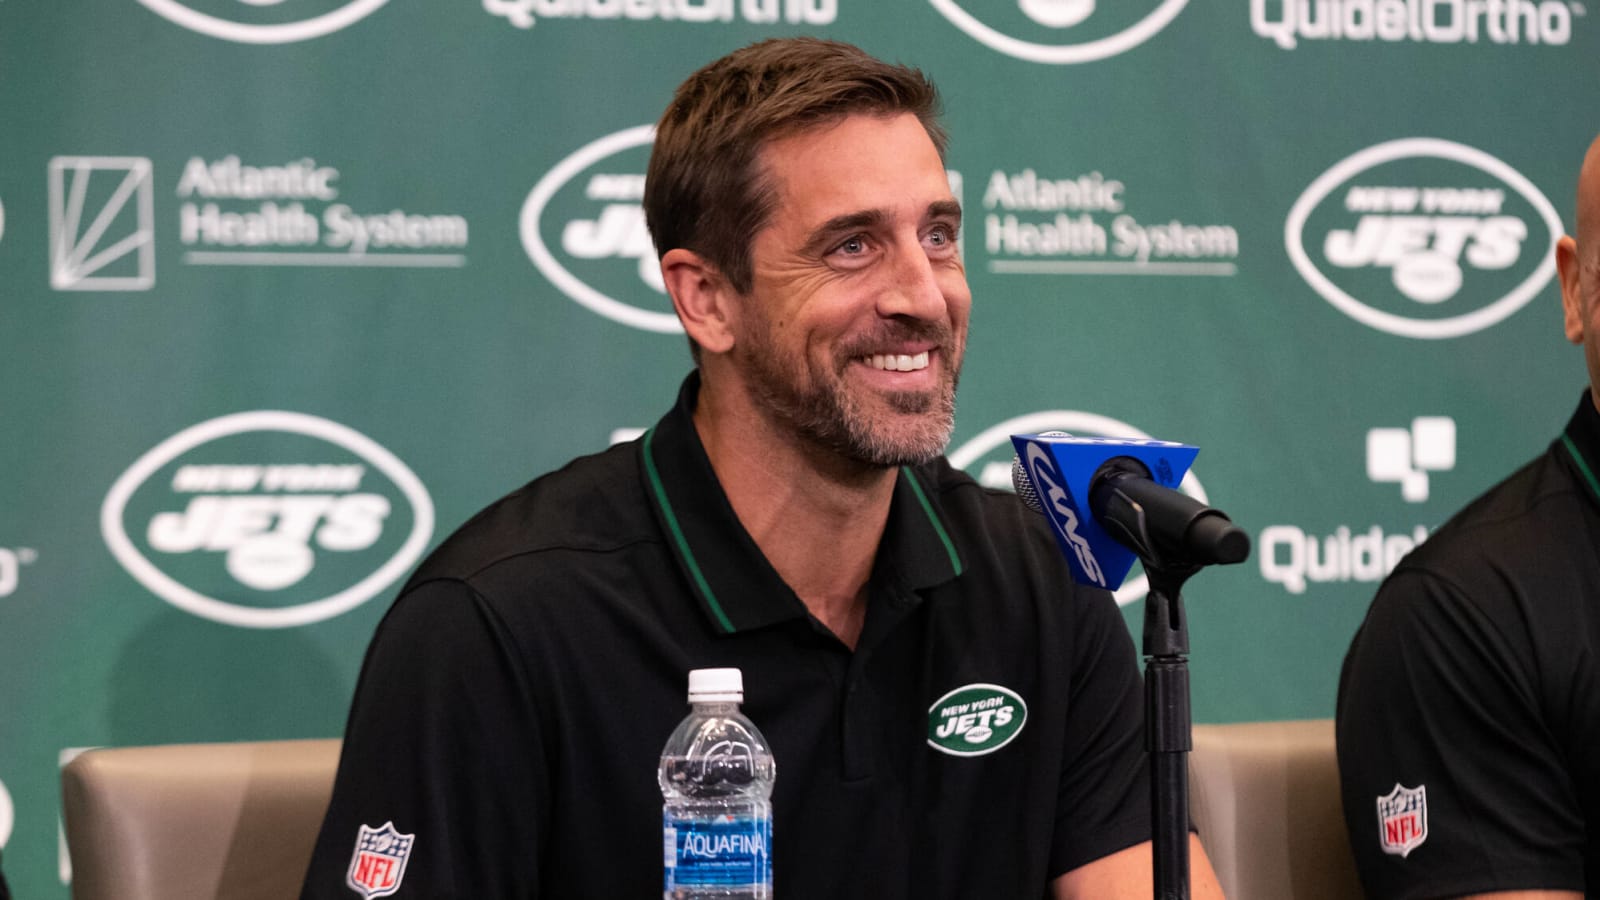 Aaron Rodgers receives hilarious new job title from New York Jets teammate